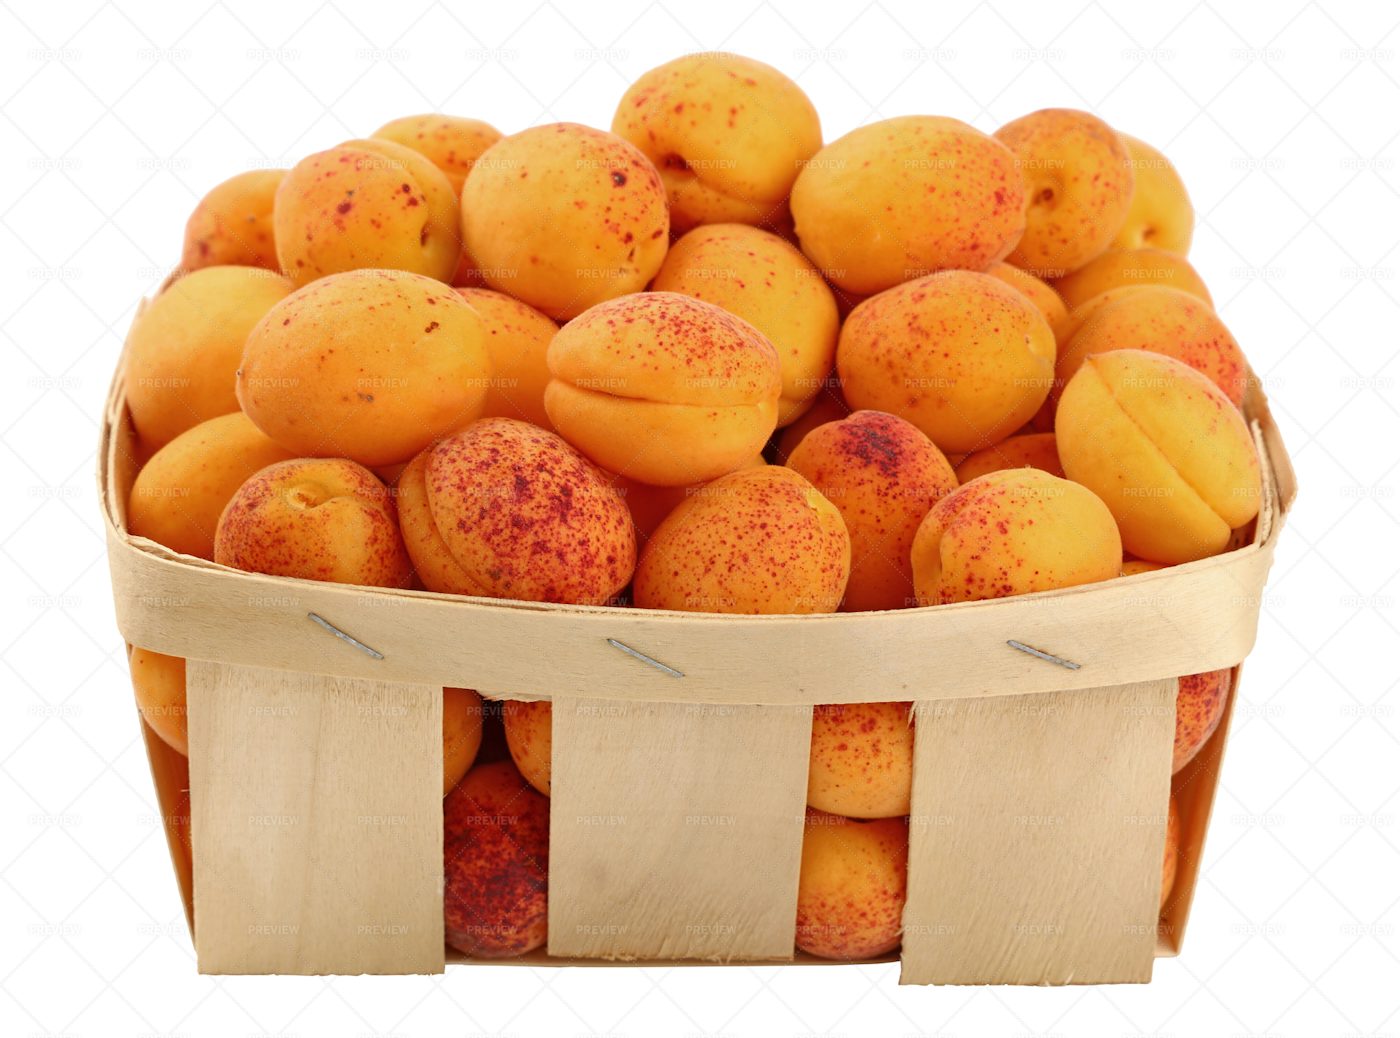 Apricots In Wooden Basket: Stock Photos